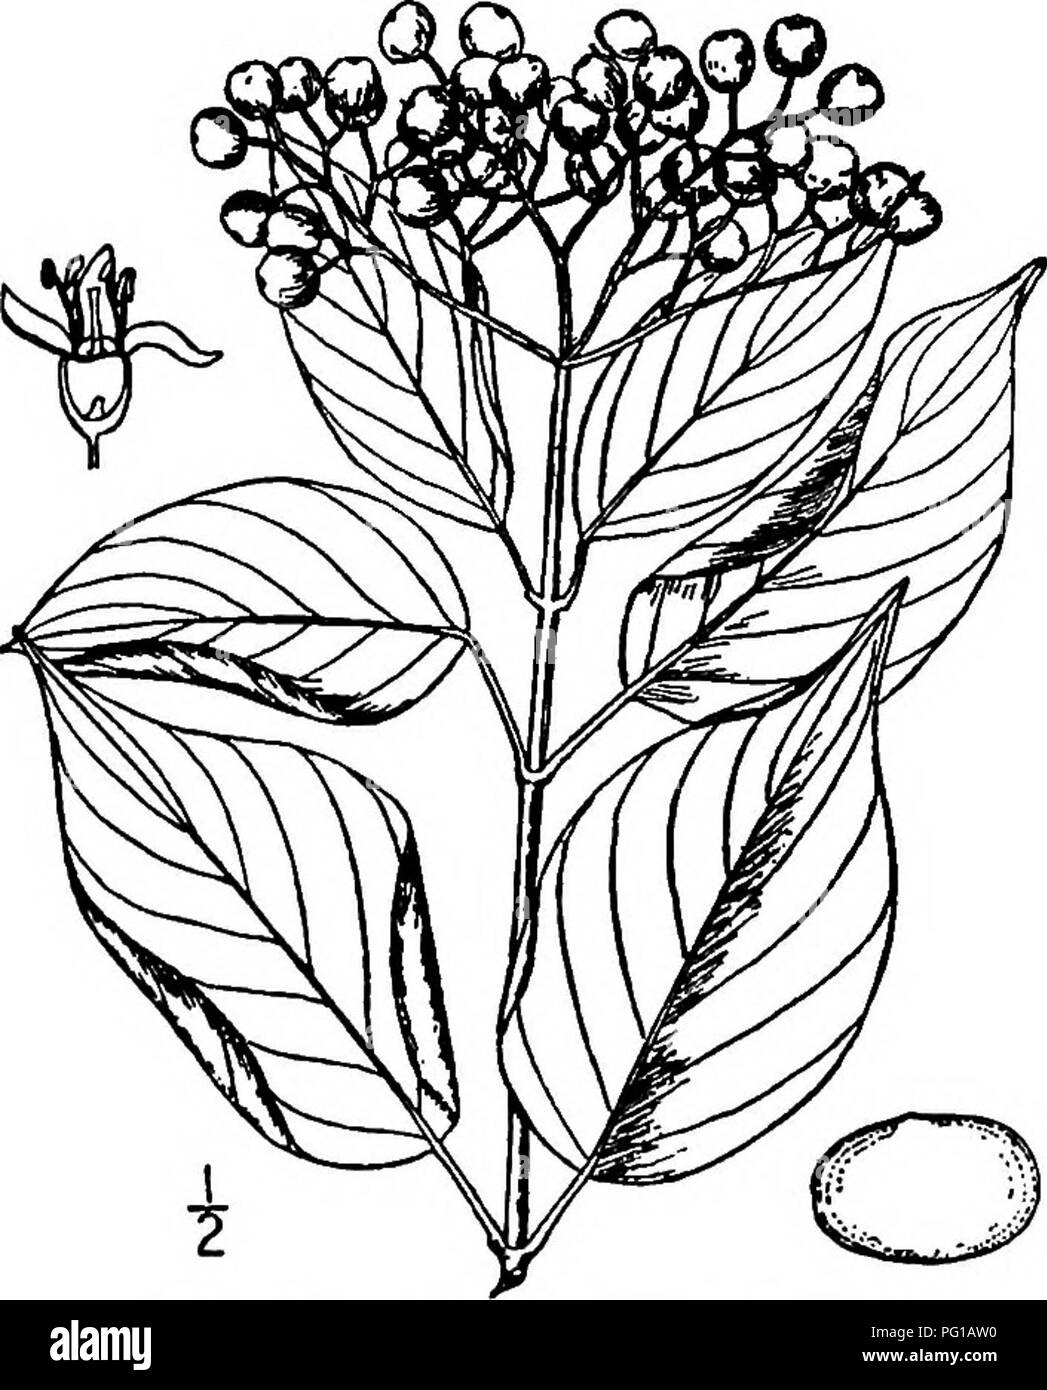 . North American trees : being descriptions and illustrations of the trees growing independently of cultivation in North America, north of Mexico and the West Indies . Trees. Rough-Leaved Cornel 743 The branches are slender, stiff and ascending, forming a narrow head. The bark is thin, close, greenish or grayish brown, the twigs slender, round, reddish brown to purplish. The leaves are opposite, firm, eUiptic, oval to ovate, 4 to 12 cm. long, taper-pointed at the apex, narrowed or tapering at the base, slightly wavy or quite entire on the margin, green and shghtly appressed-hairy above, paler  Stock Photo